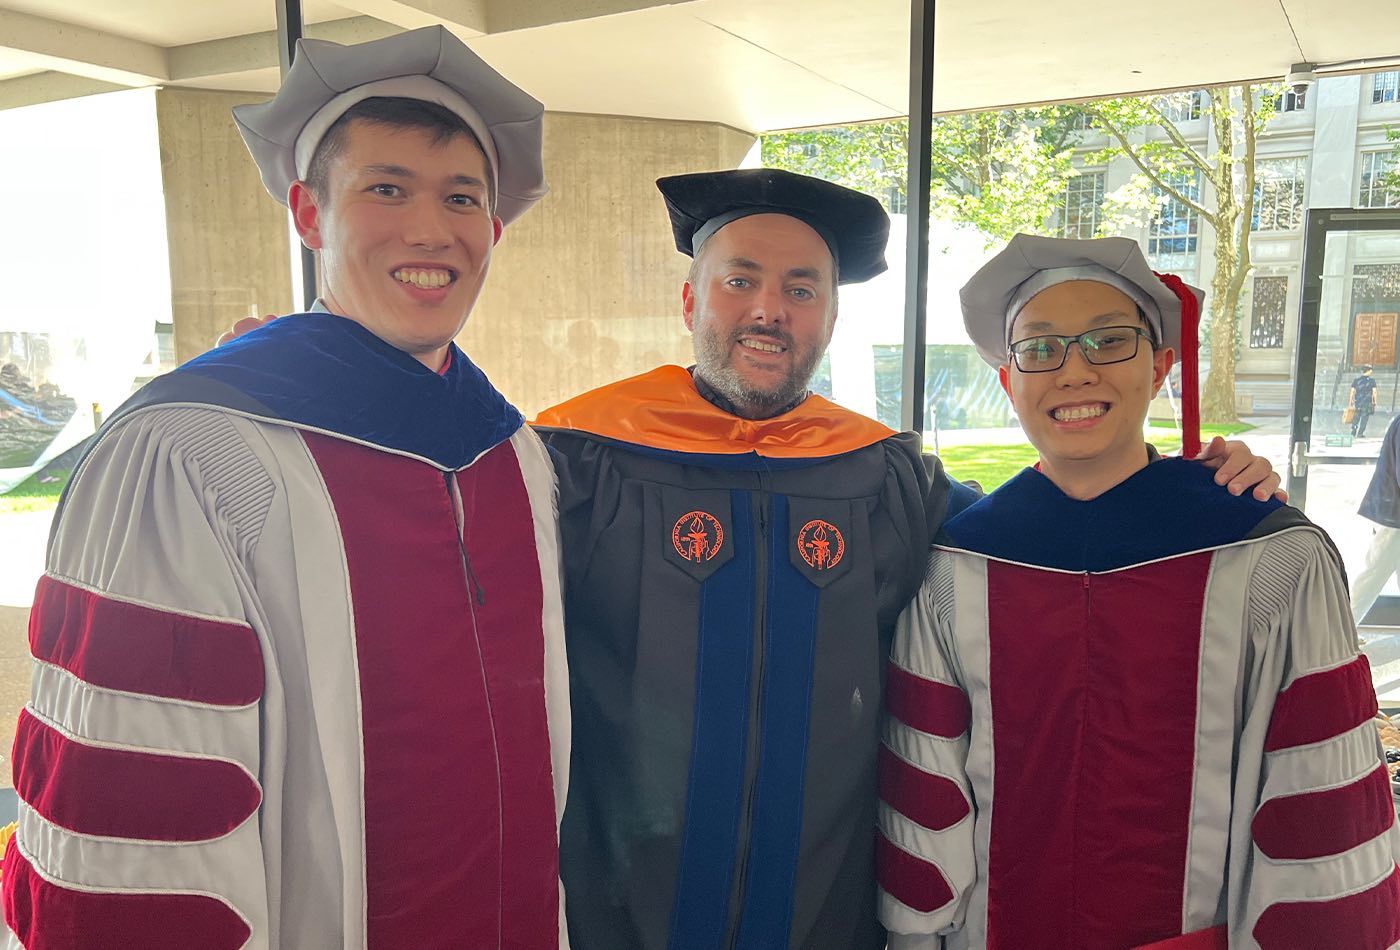 Professor Dan Suess stands with two newly minted PhD recipients.